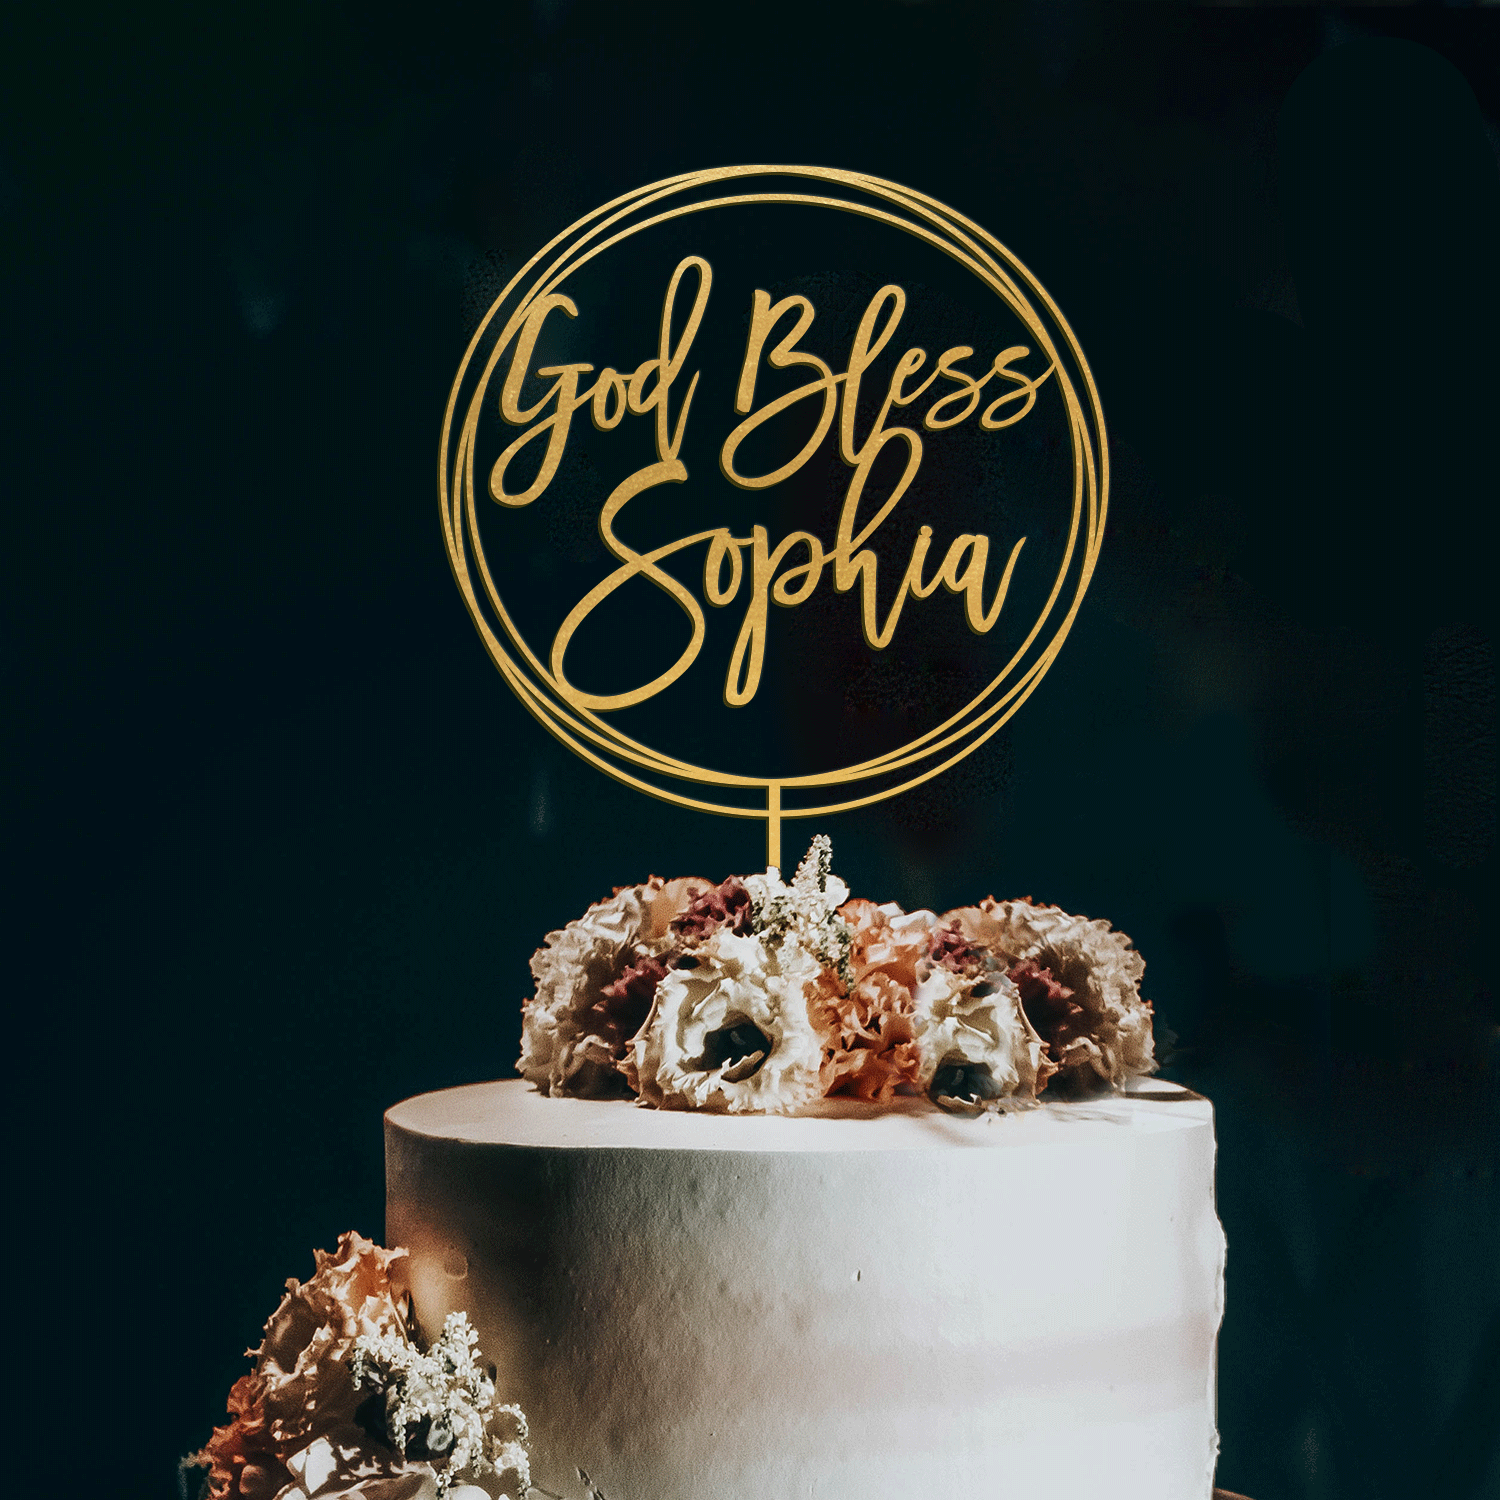 Cakes for God by Deicy Truter